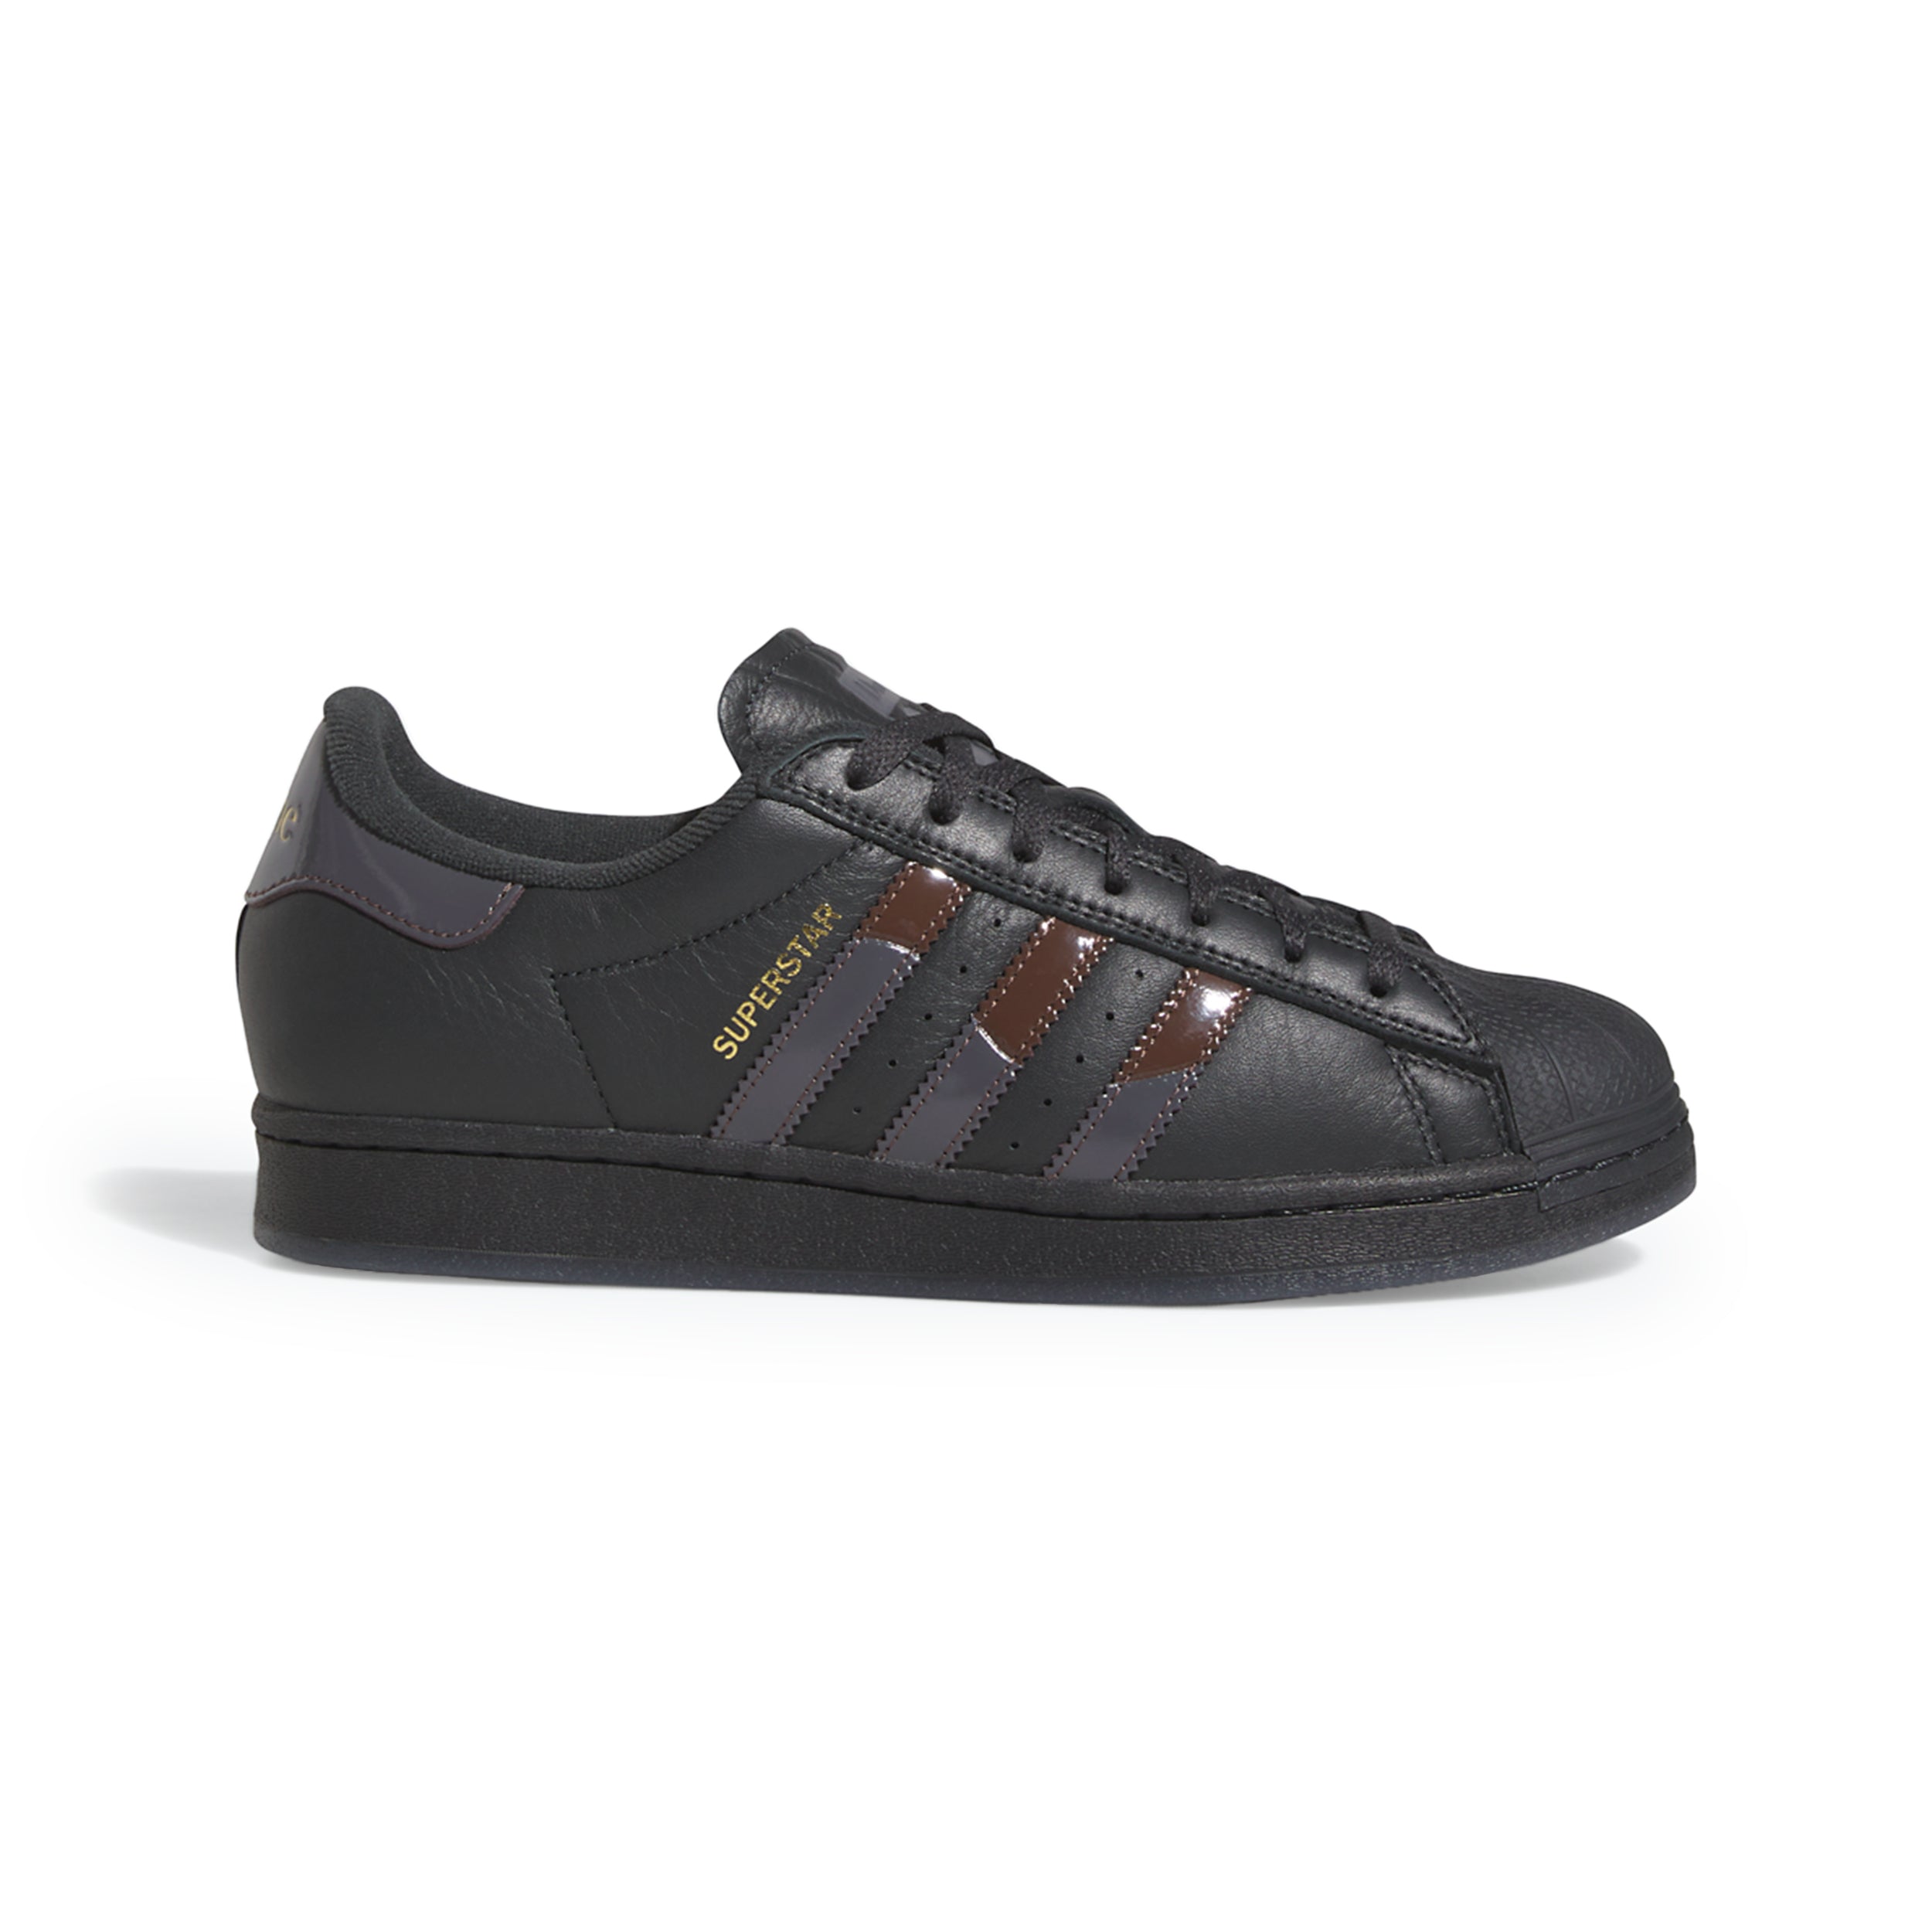 adidas superstar black and brown